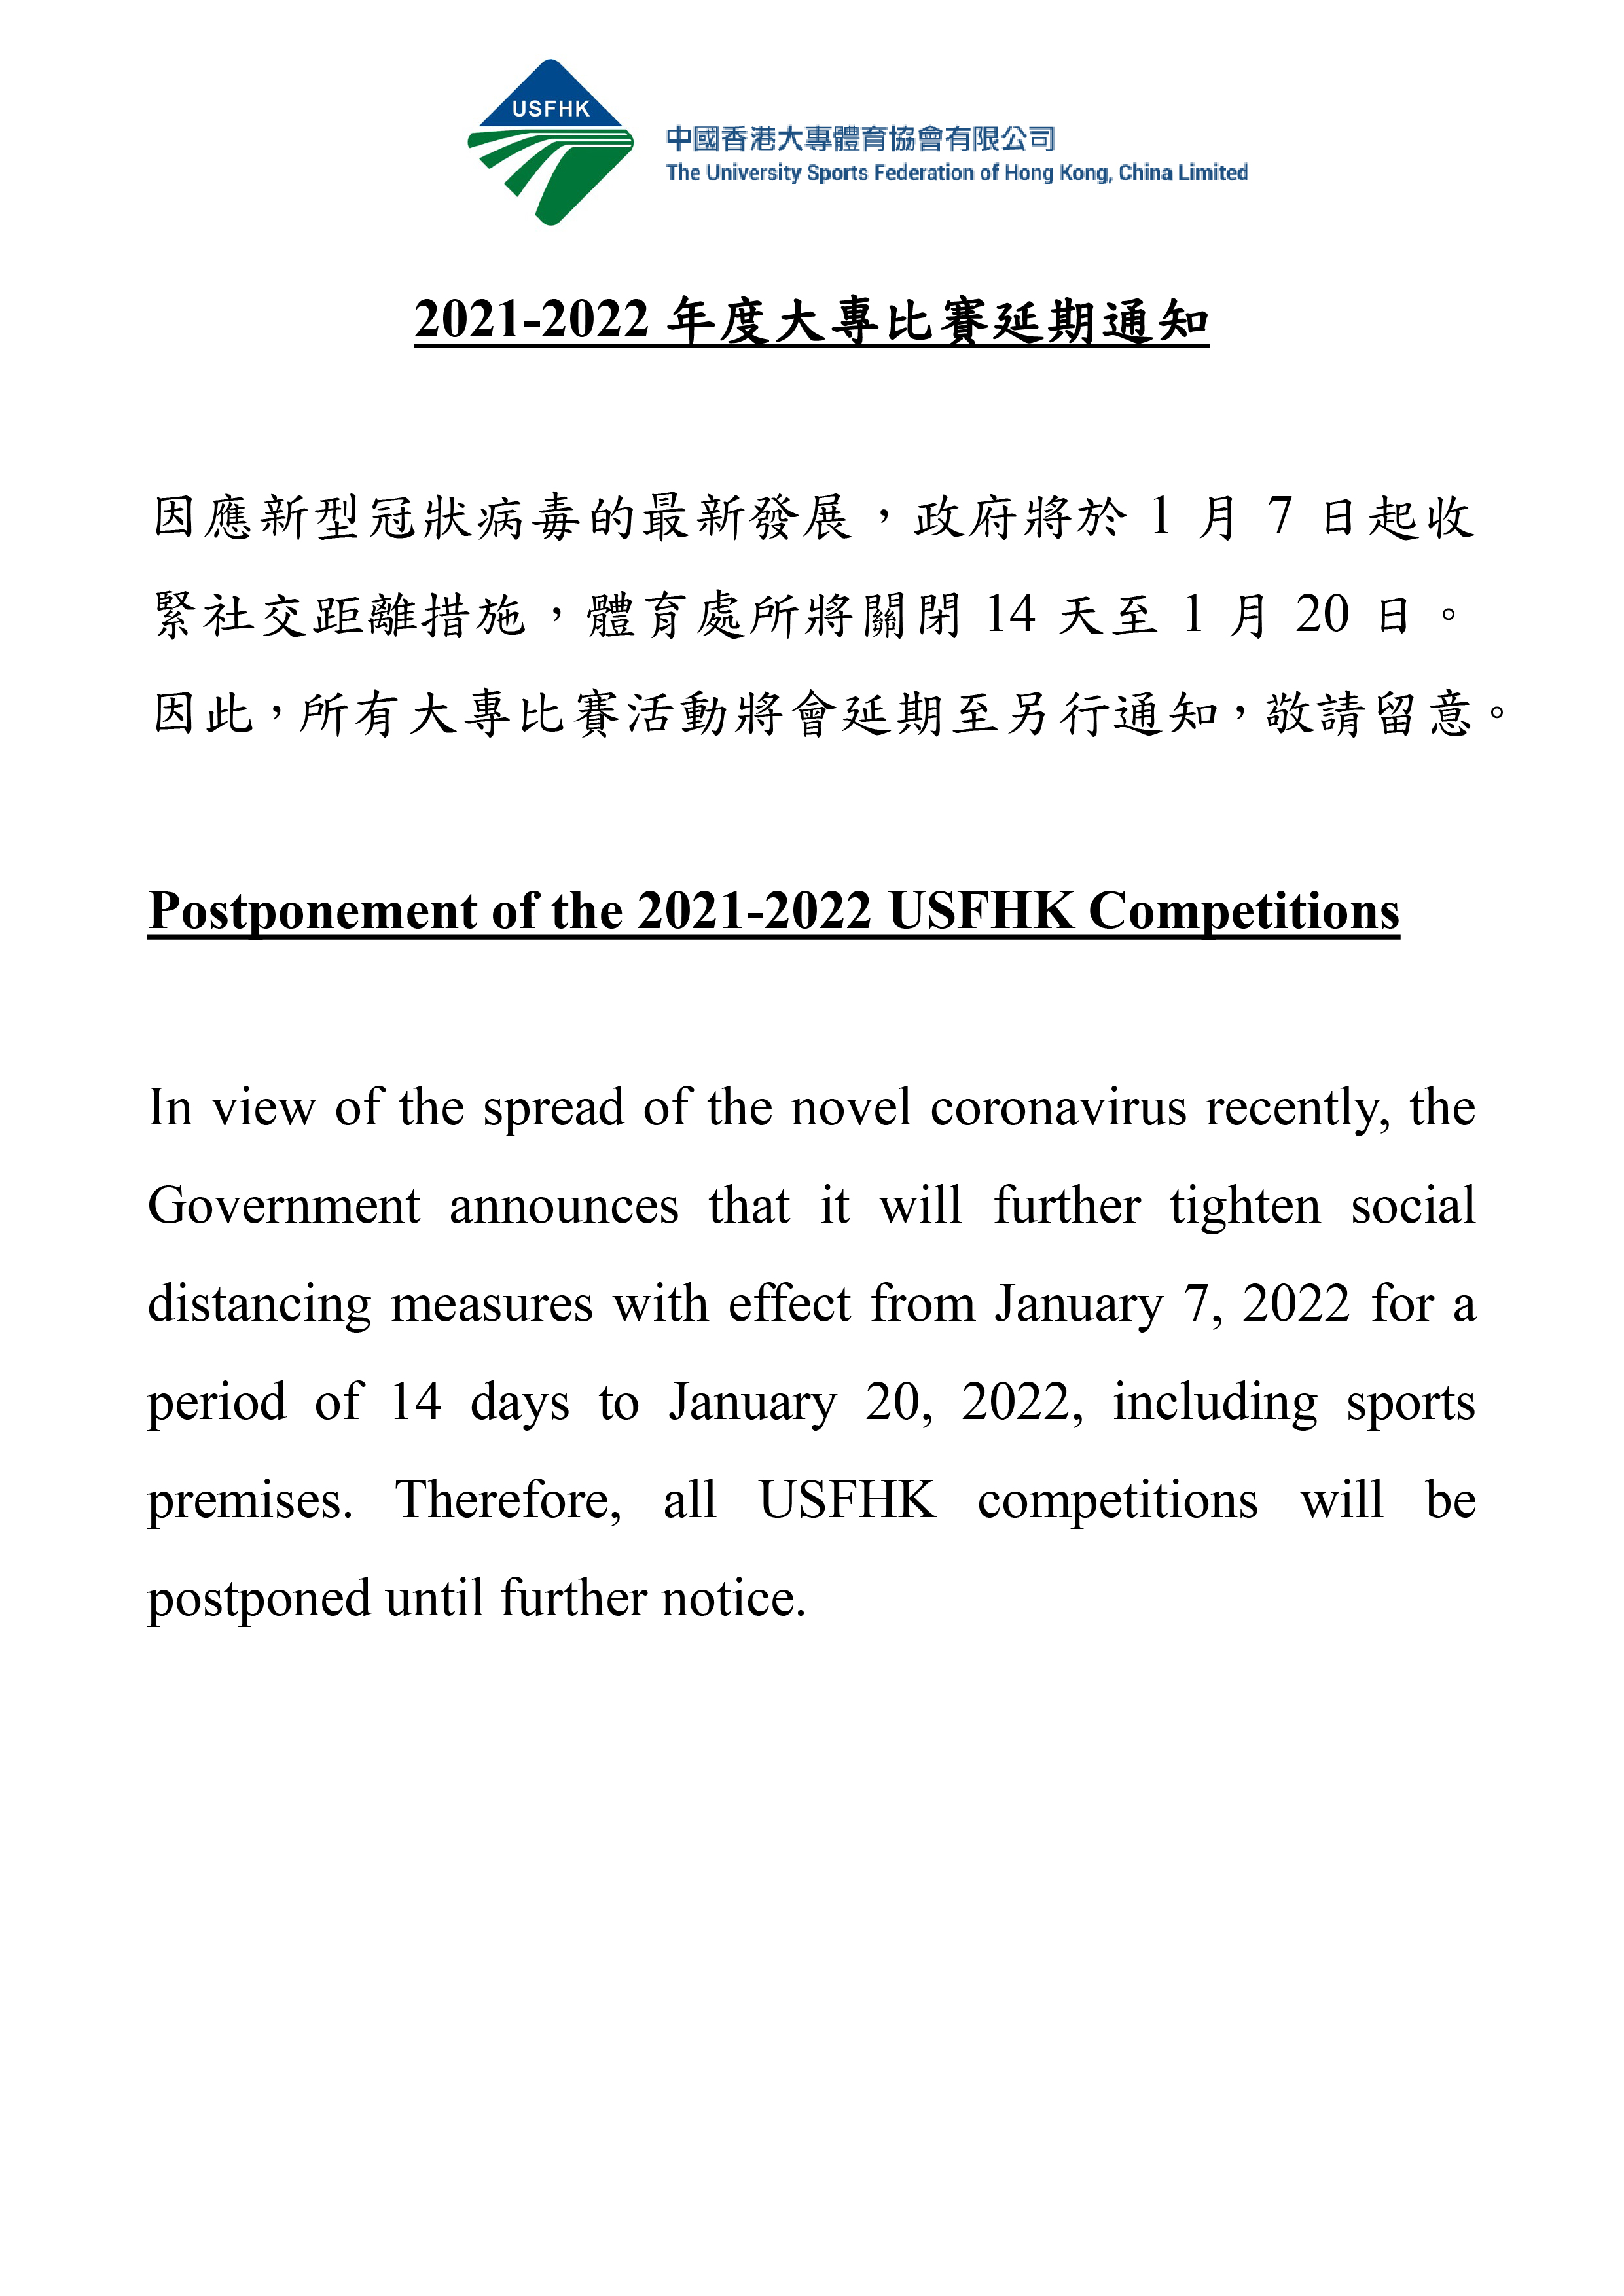 Postponement of the 2021-2022 USFHK Competitions